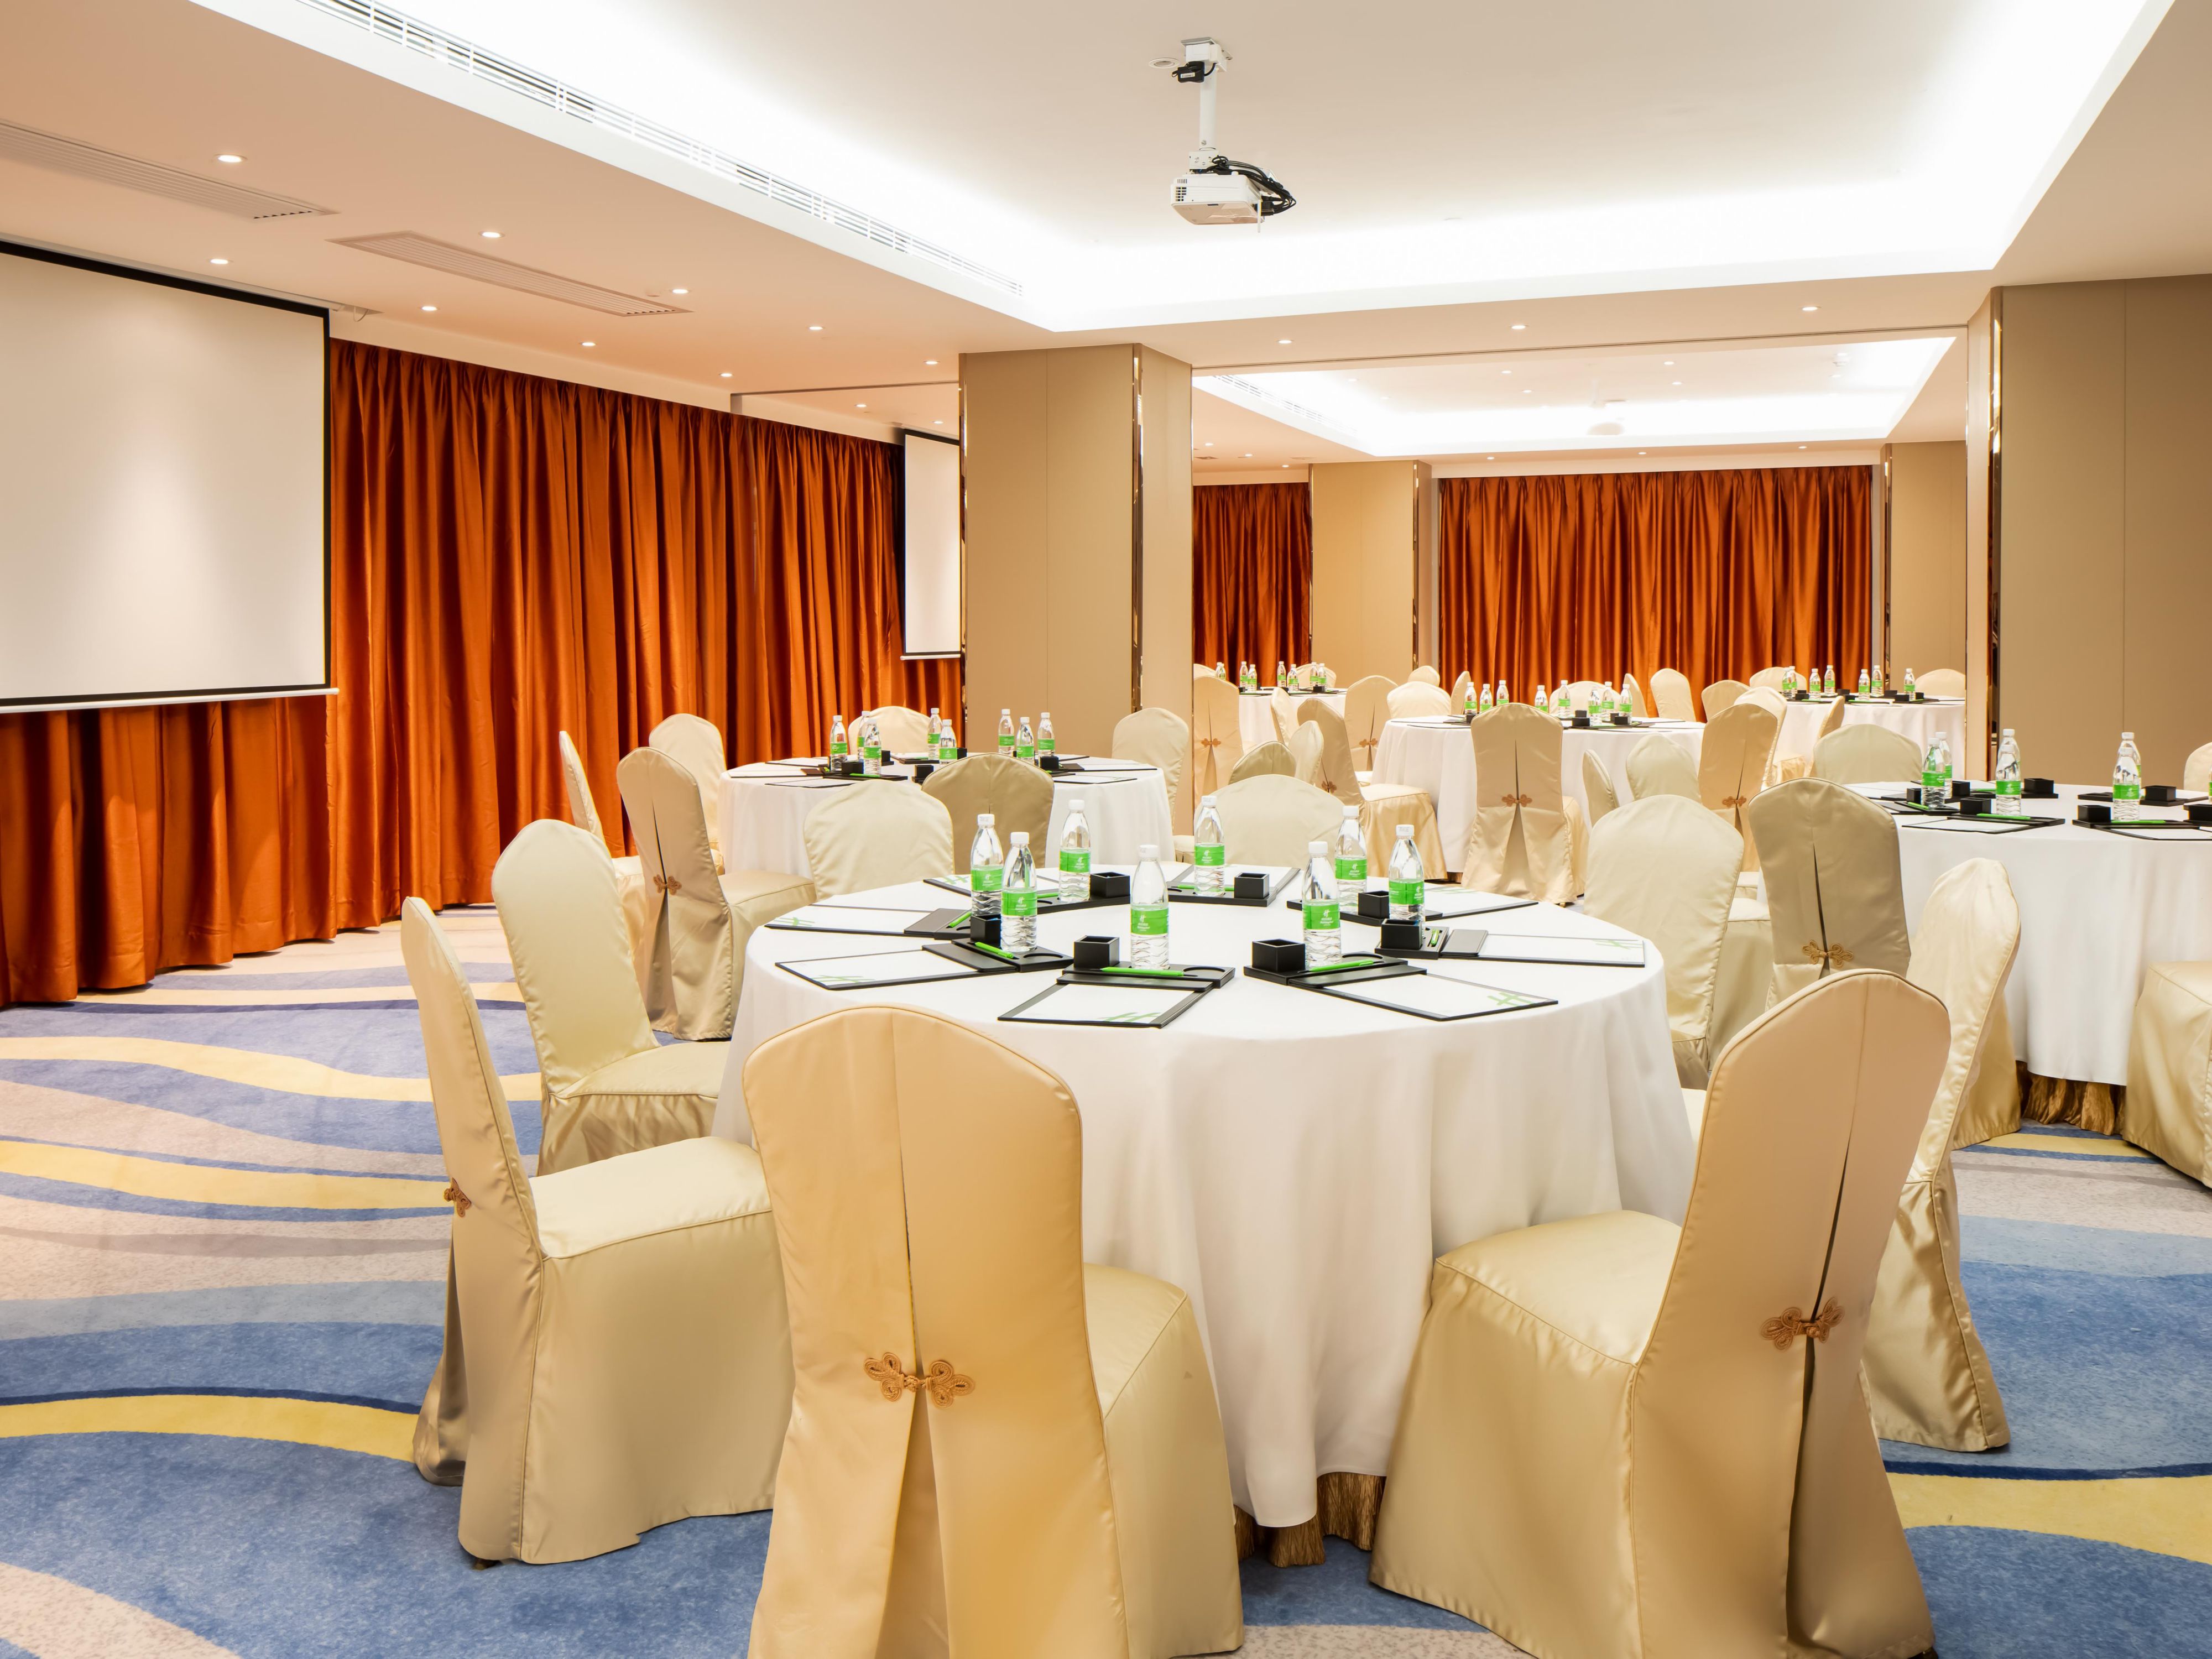 The meeting rooms can cater for meetings, training sessions, seminars and social functions, from 15 - 140 people. Our professional and experienced team can also cater for your every possible need, either for in-house functions or outside catering functions.